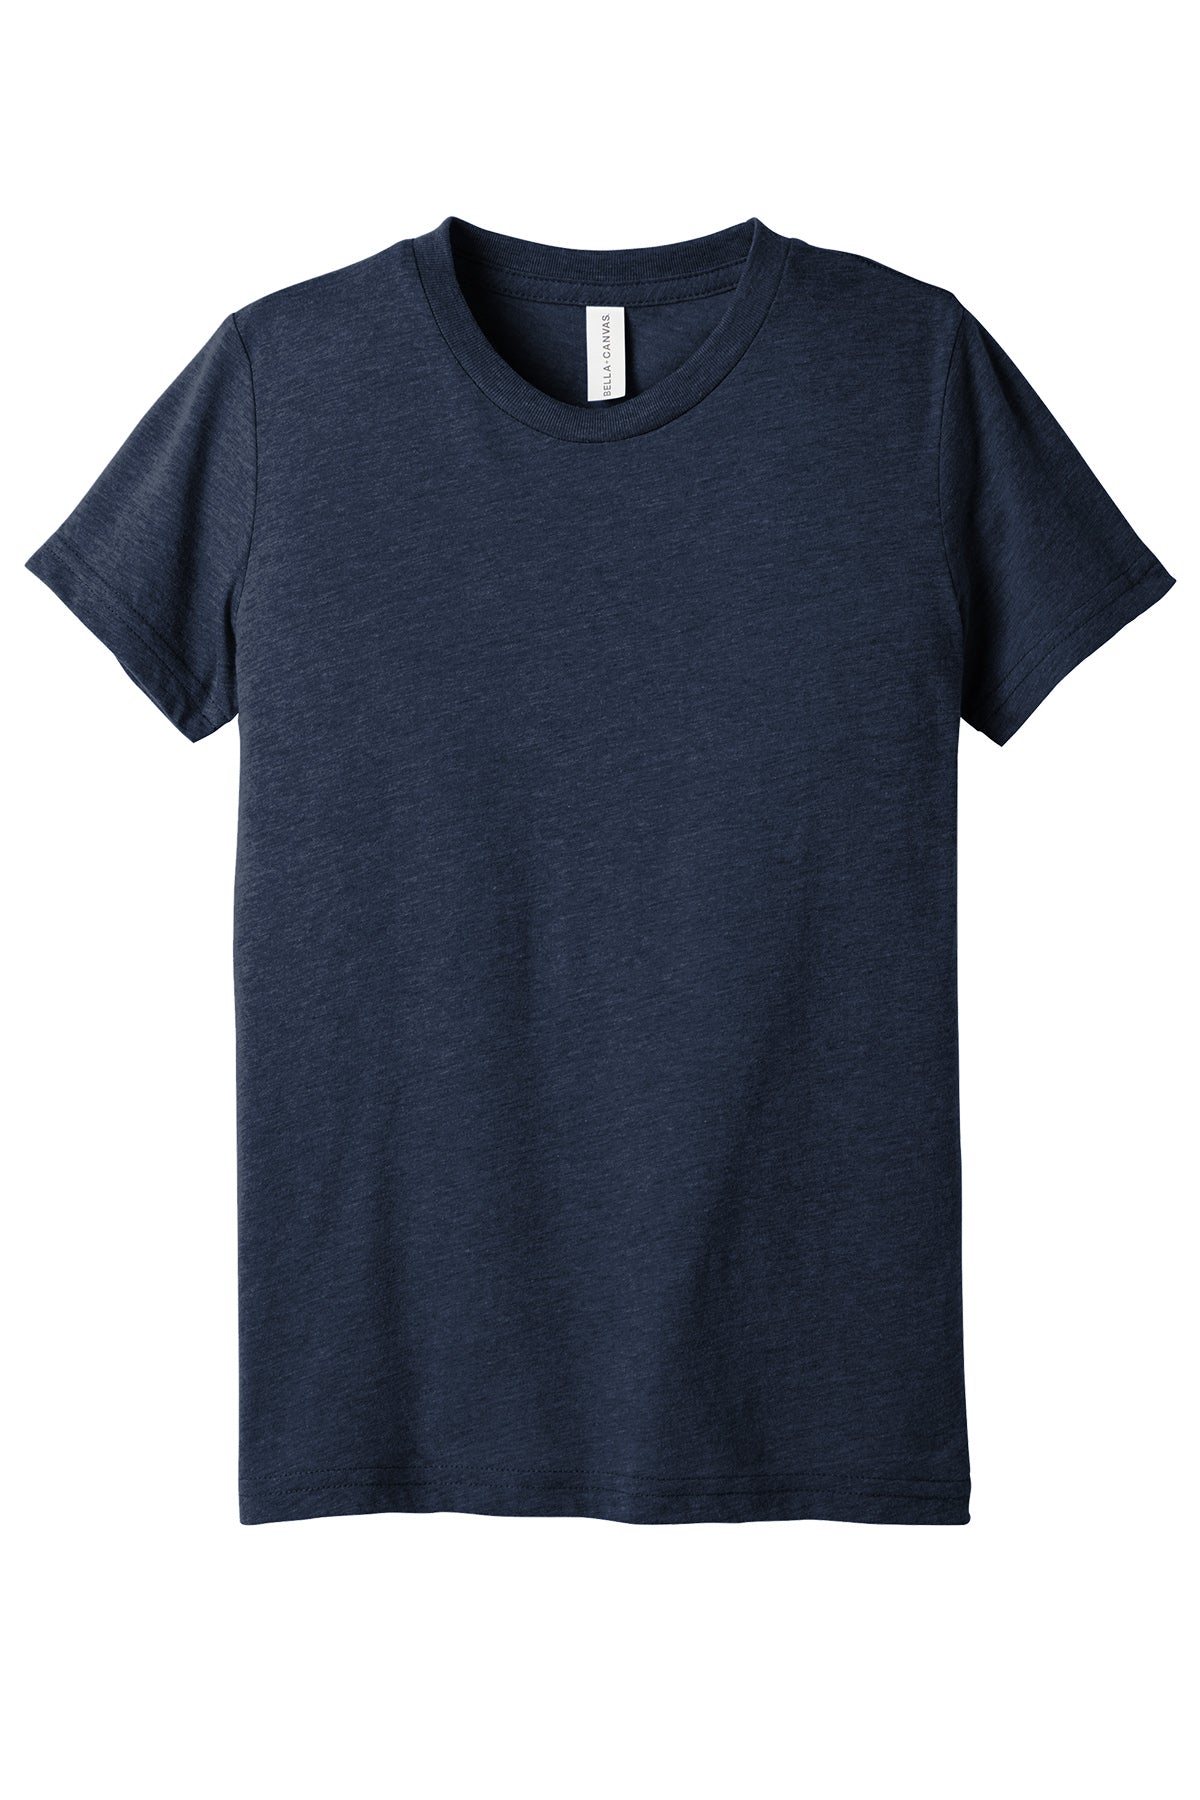 Bella+Canvas Bc3413Y Youth T-Shirt Yth Small / Solid Navy Triblend